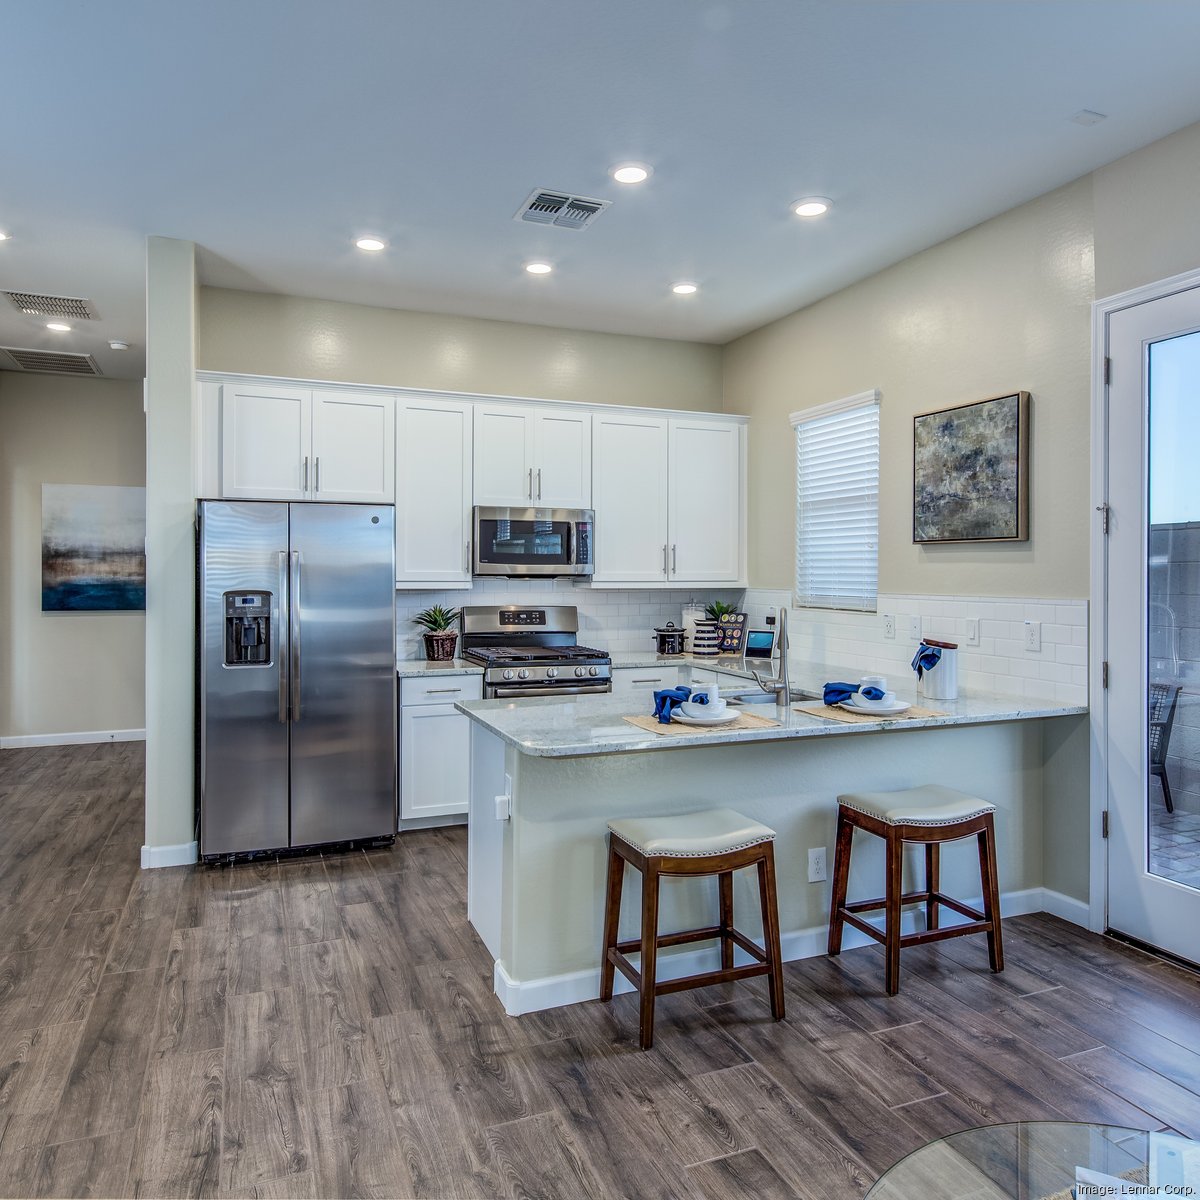 Lennar  Products and Services - Next Gen - The Home Within A Home